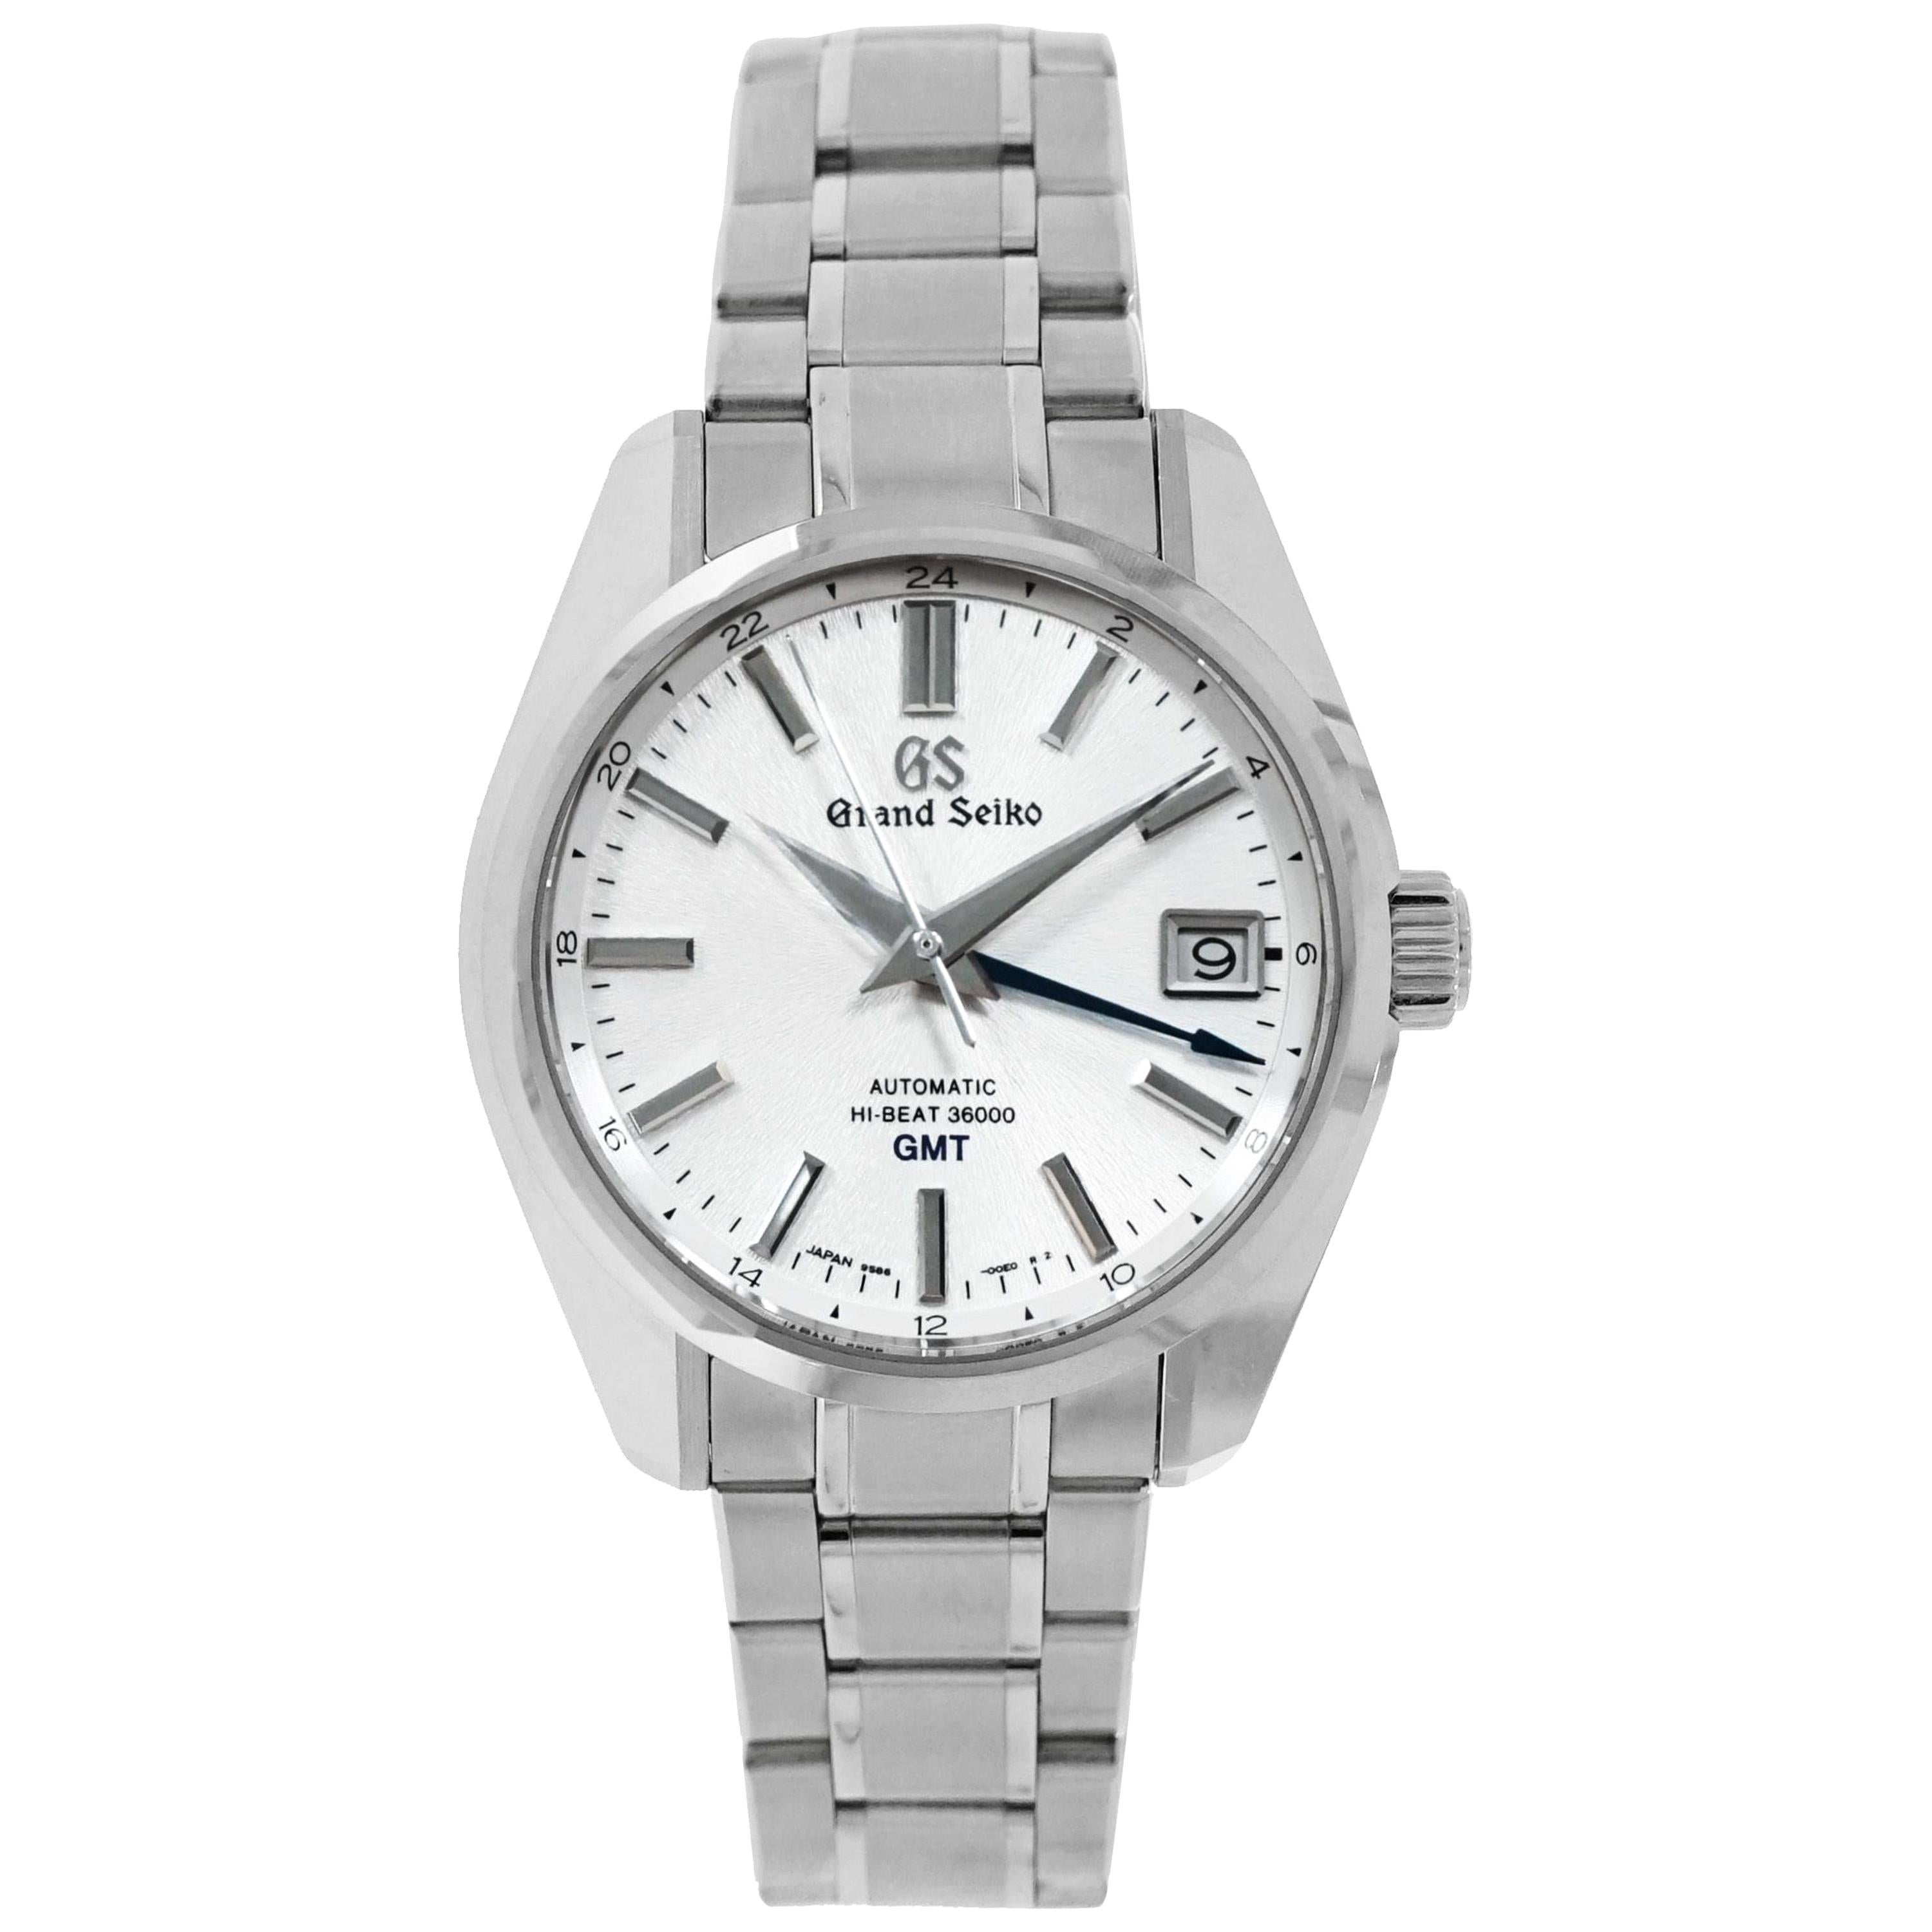 Grand Seiko GMT Stainless Steel Watch